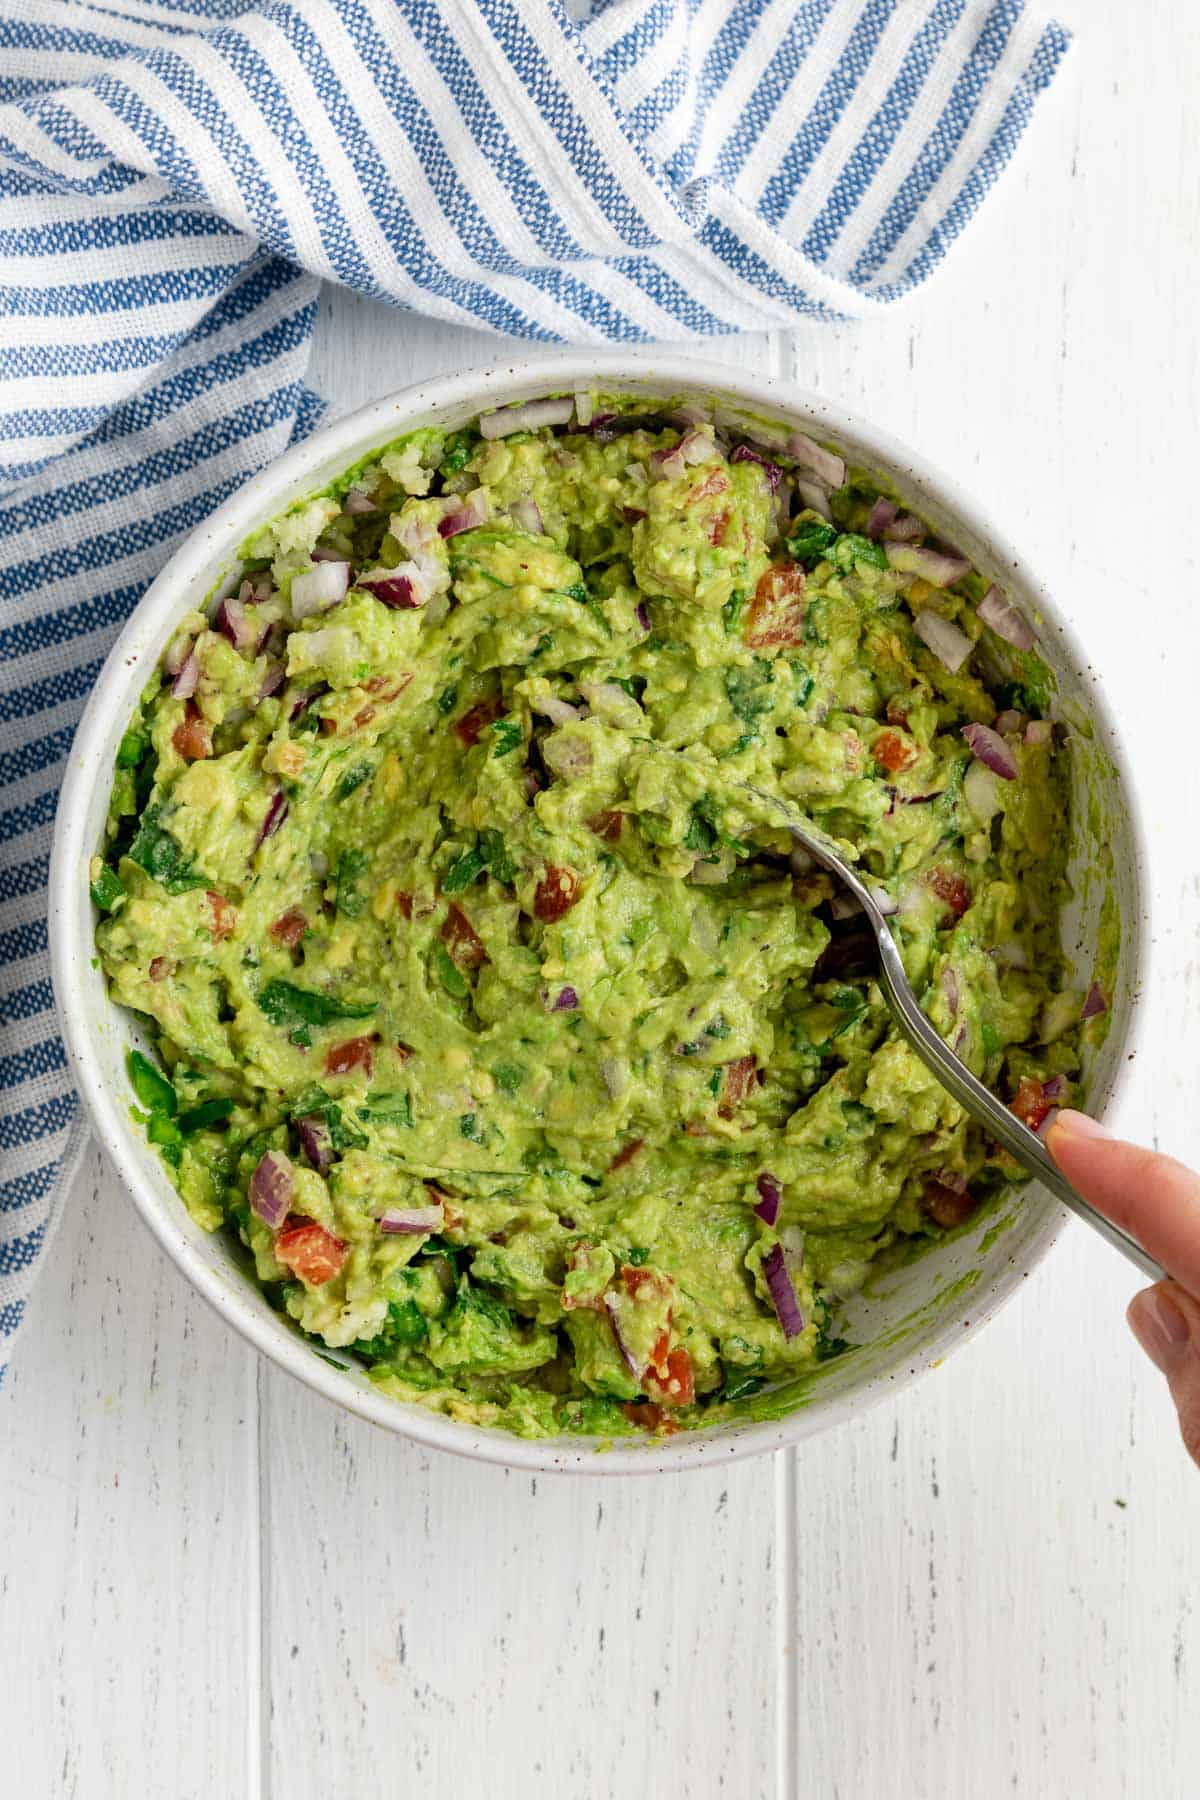 hand mixing guacamole in a large white bowl beside a striped kitchen towel